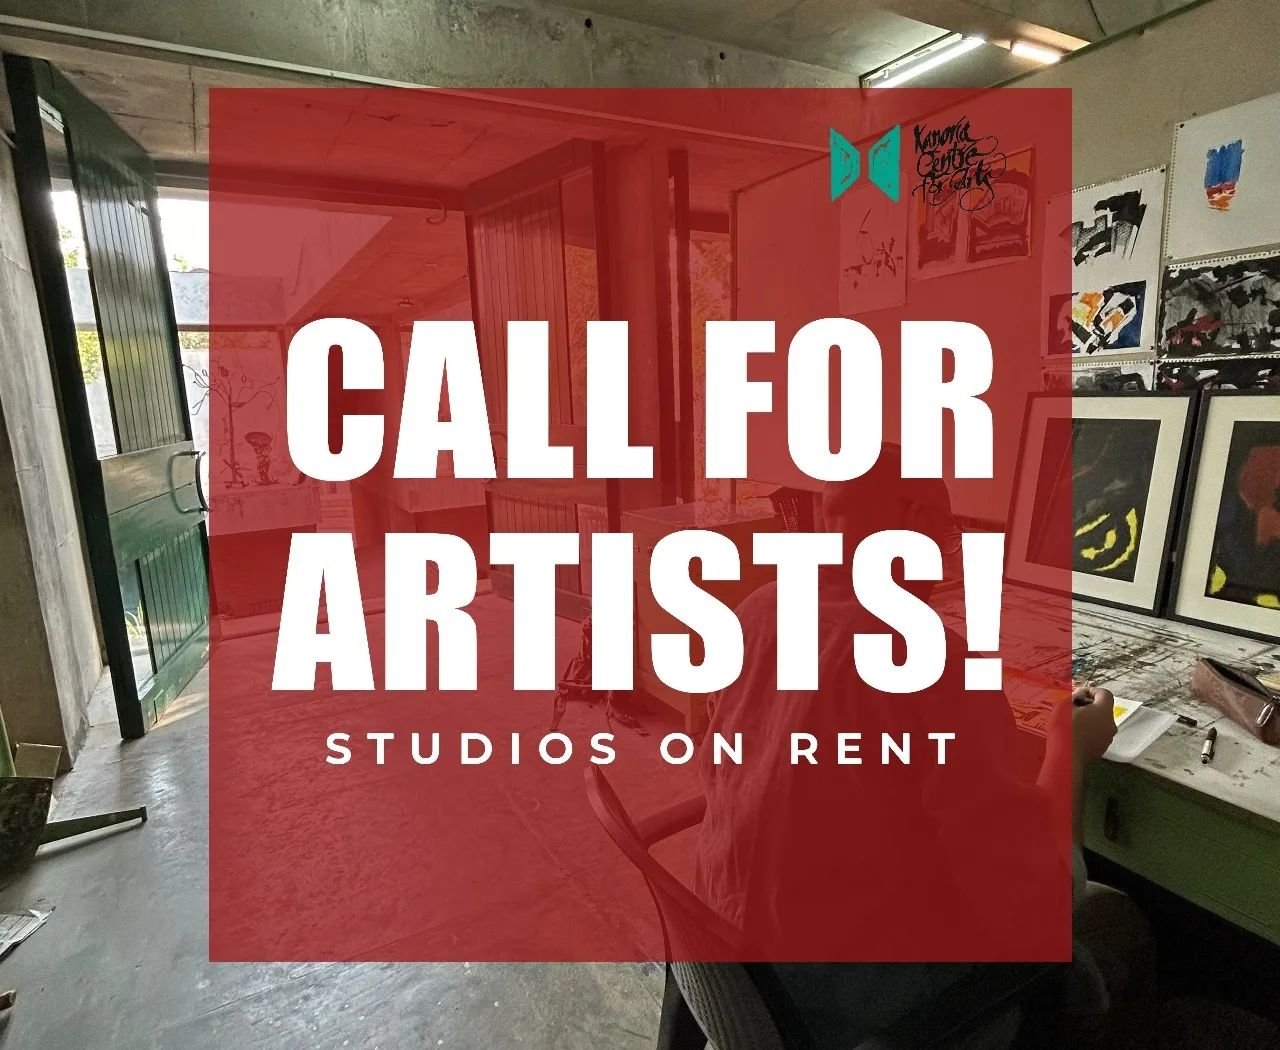 𝗖𝗔𝗟𝗟 𝗙𝗢𝗥 𝗔𝗥𝗧𝗜𝗦𝗧𝗦!

Have a Bachelors or Masters Degree in Fine arts but don't have a studio for practicing your art? Kanoria Centre for Arts has total 22 studios in painting, graphics, ceramics and sculpture! The studio is available on r